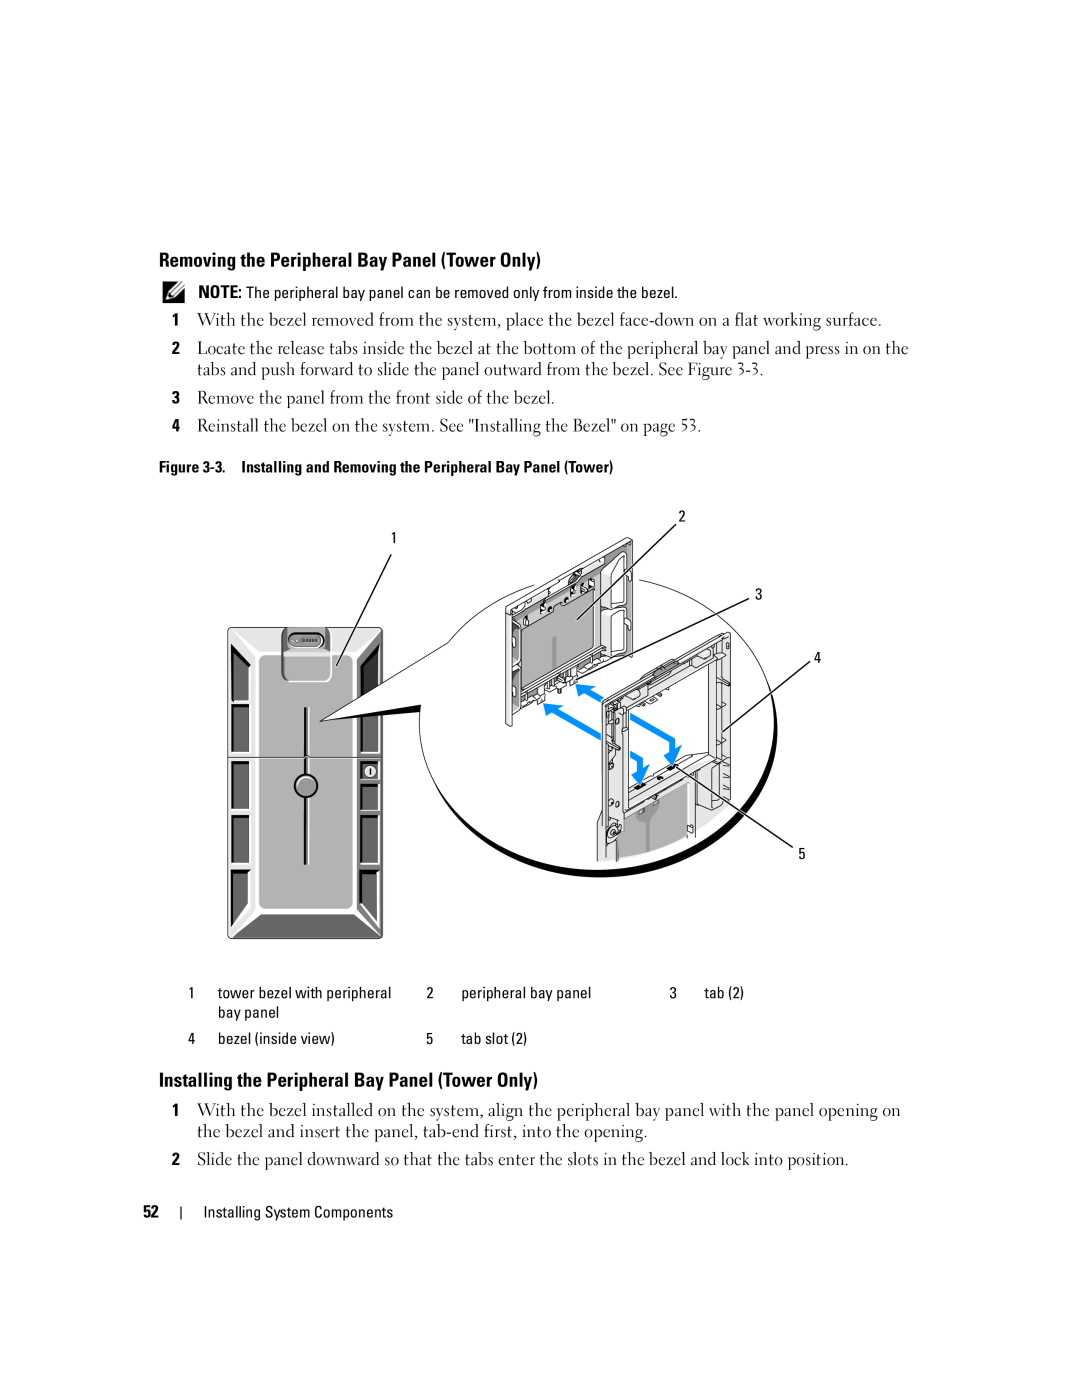 Dell 2900 owner manual Removing the Peripheral Bay Panel Tower Only, Installing the Peripheral Bay Panel Tower Only 